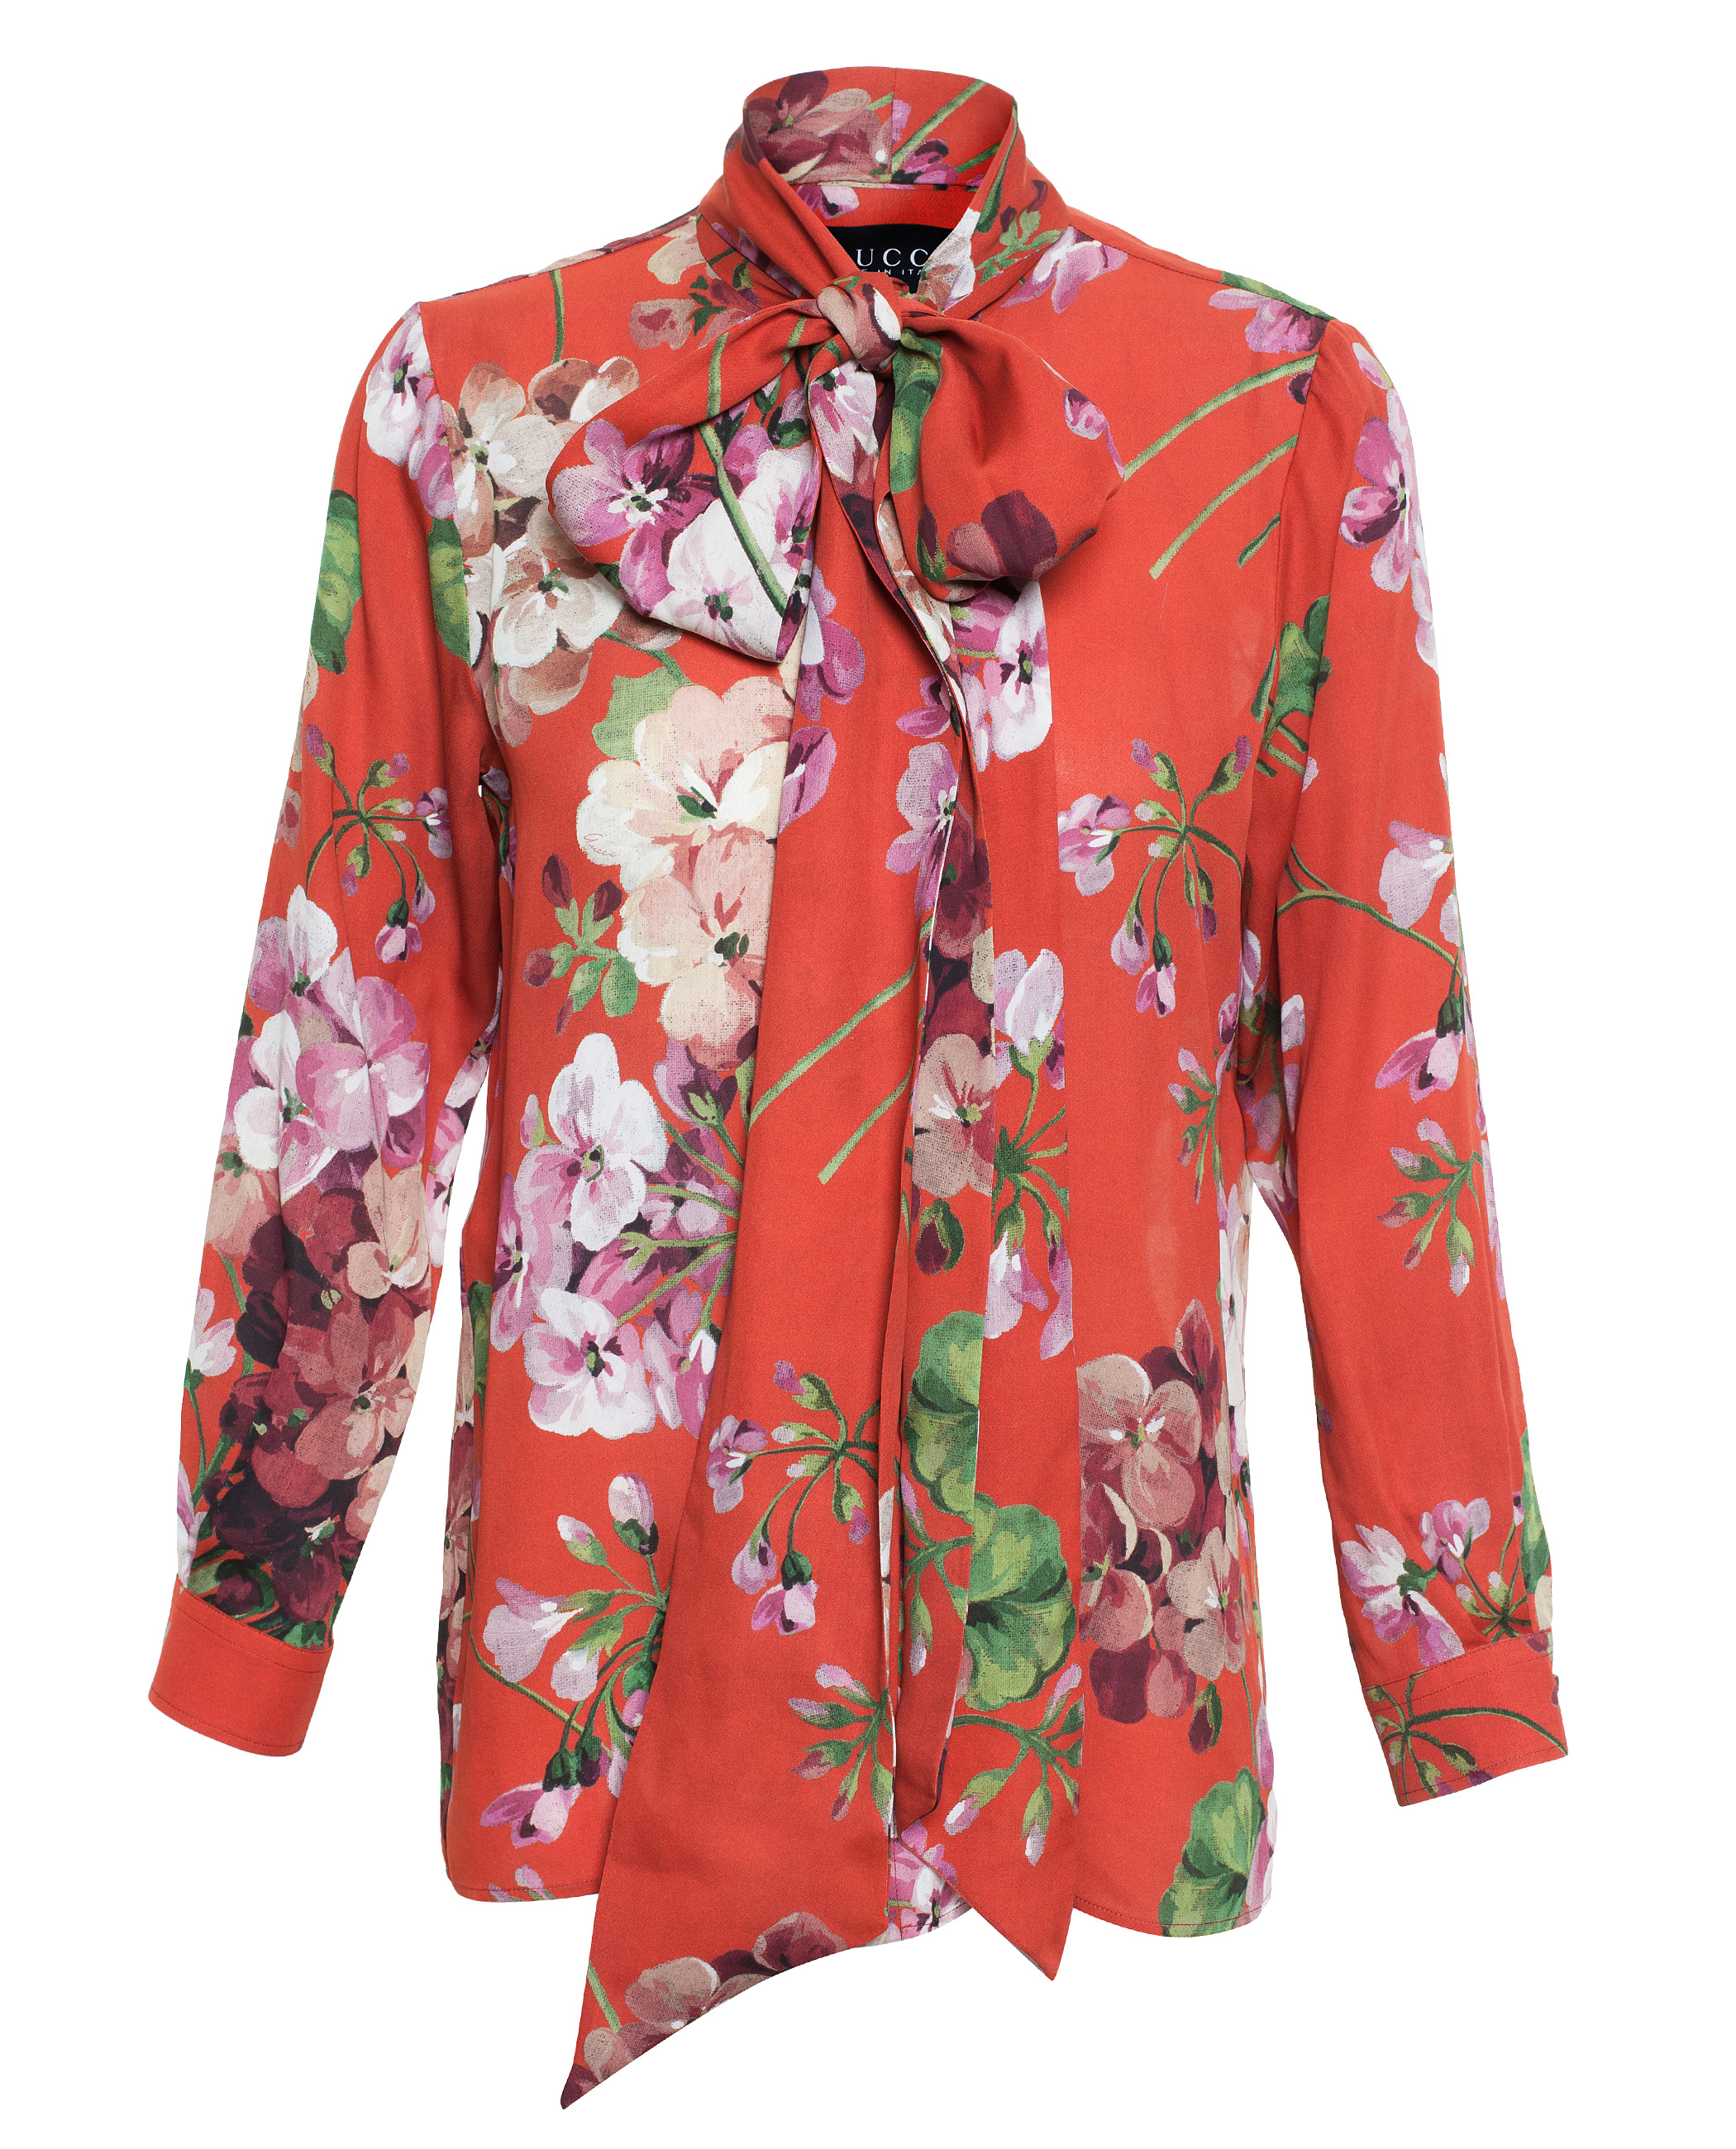 Gucci Floral Print Silk Blouse in Black - Lyst